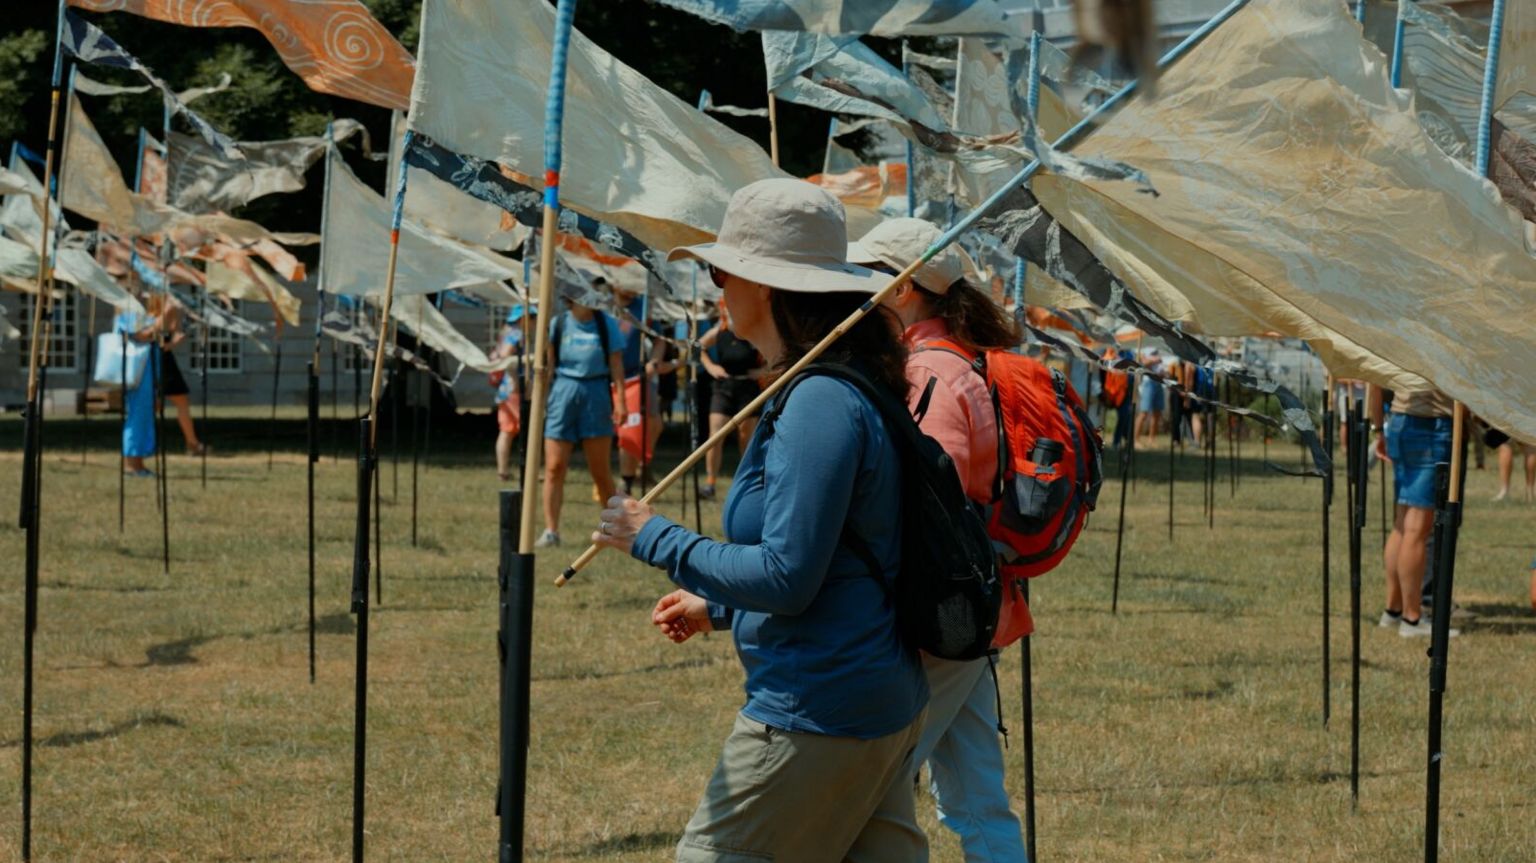 People walking through area with flags in the ground i